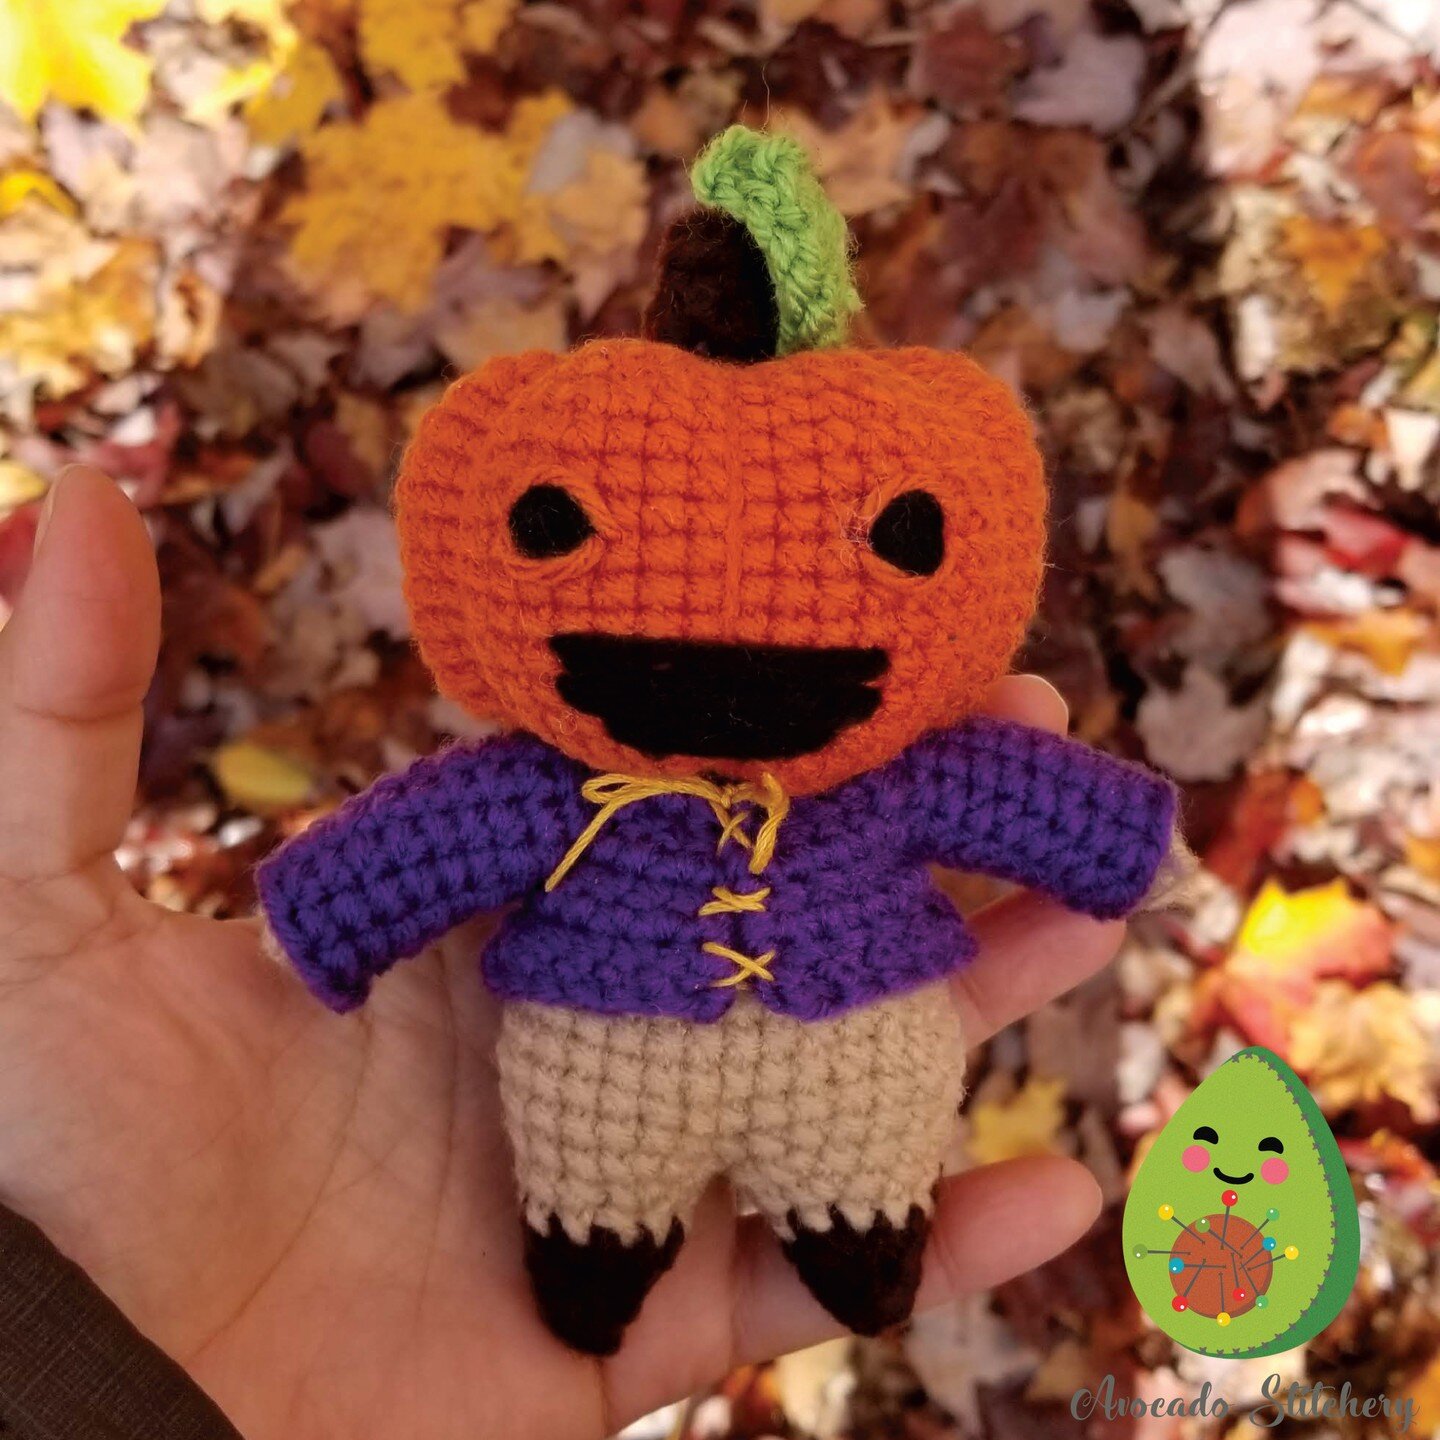 Just 46 days 'til Halloween! And what better way to get ready for it than making your own Pumpkin Star! 🎃
&bull;
🥑You can get this free pattern on my website!🥑
&bull;
#avocadostitchery #crochet #crochetaddict #instacrochet #handmade #ganchillo #am